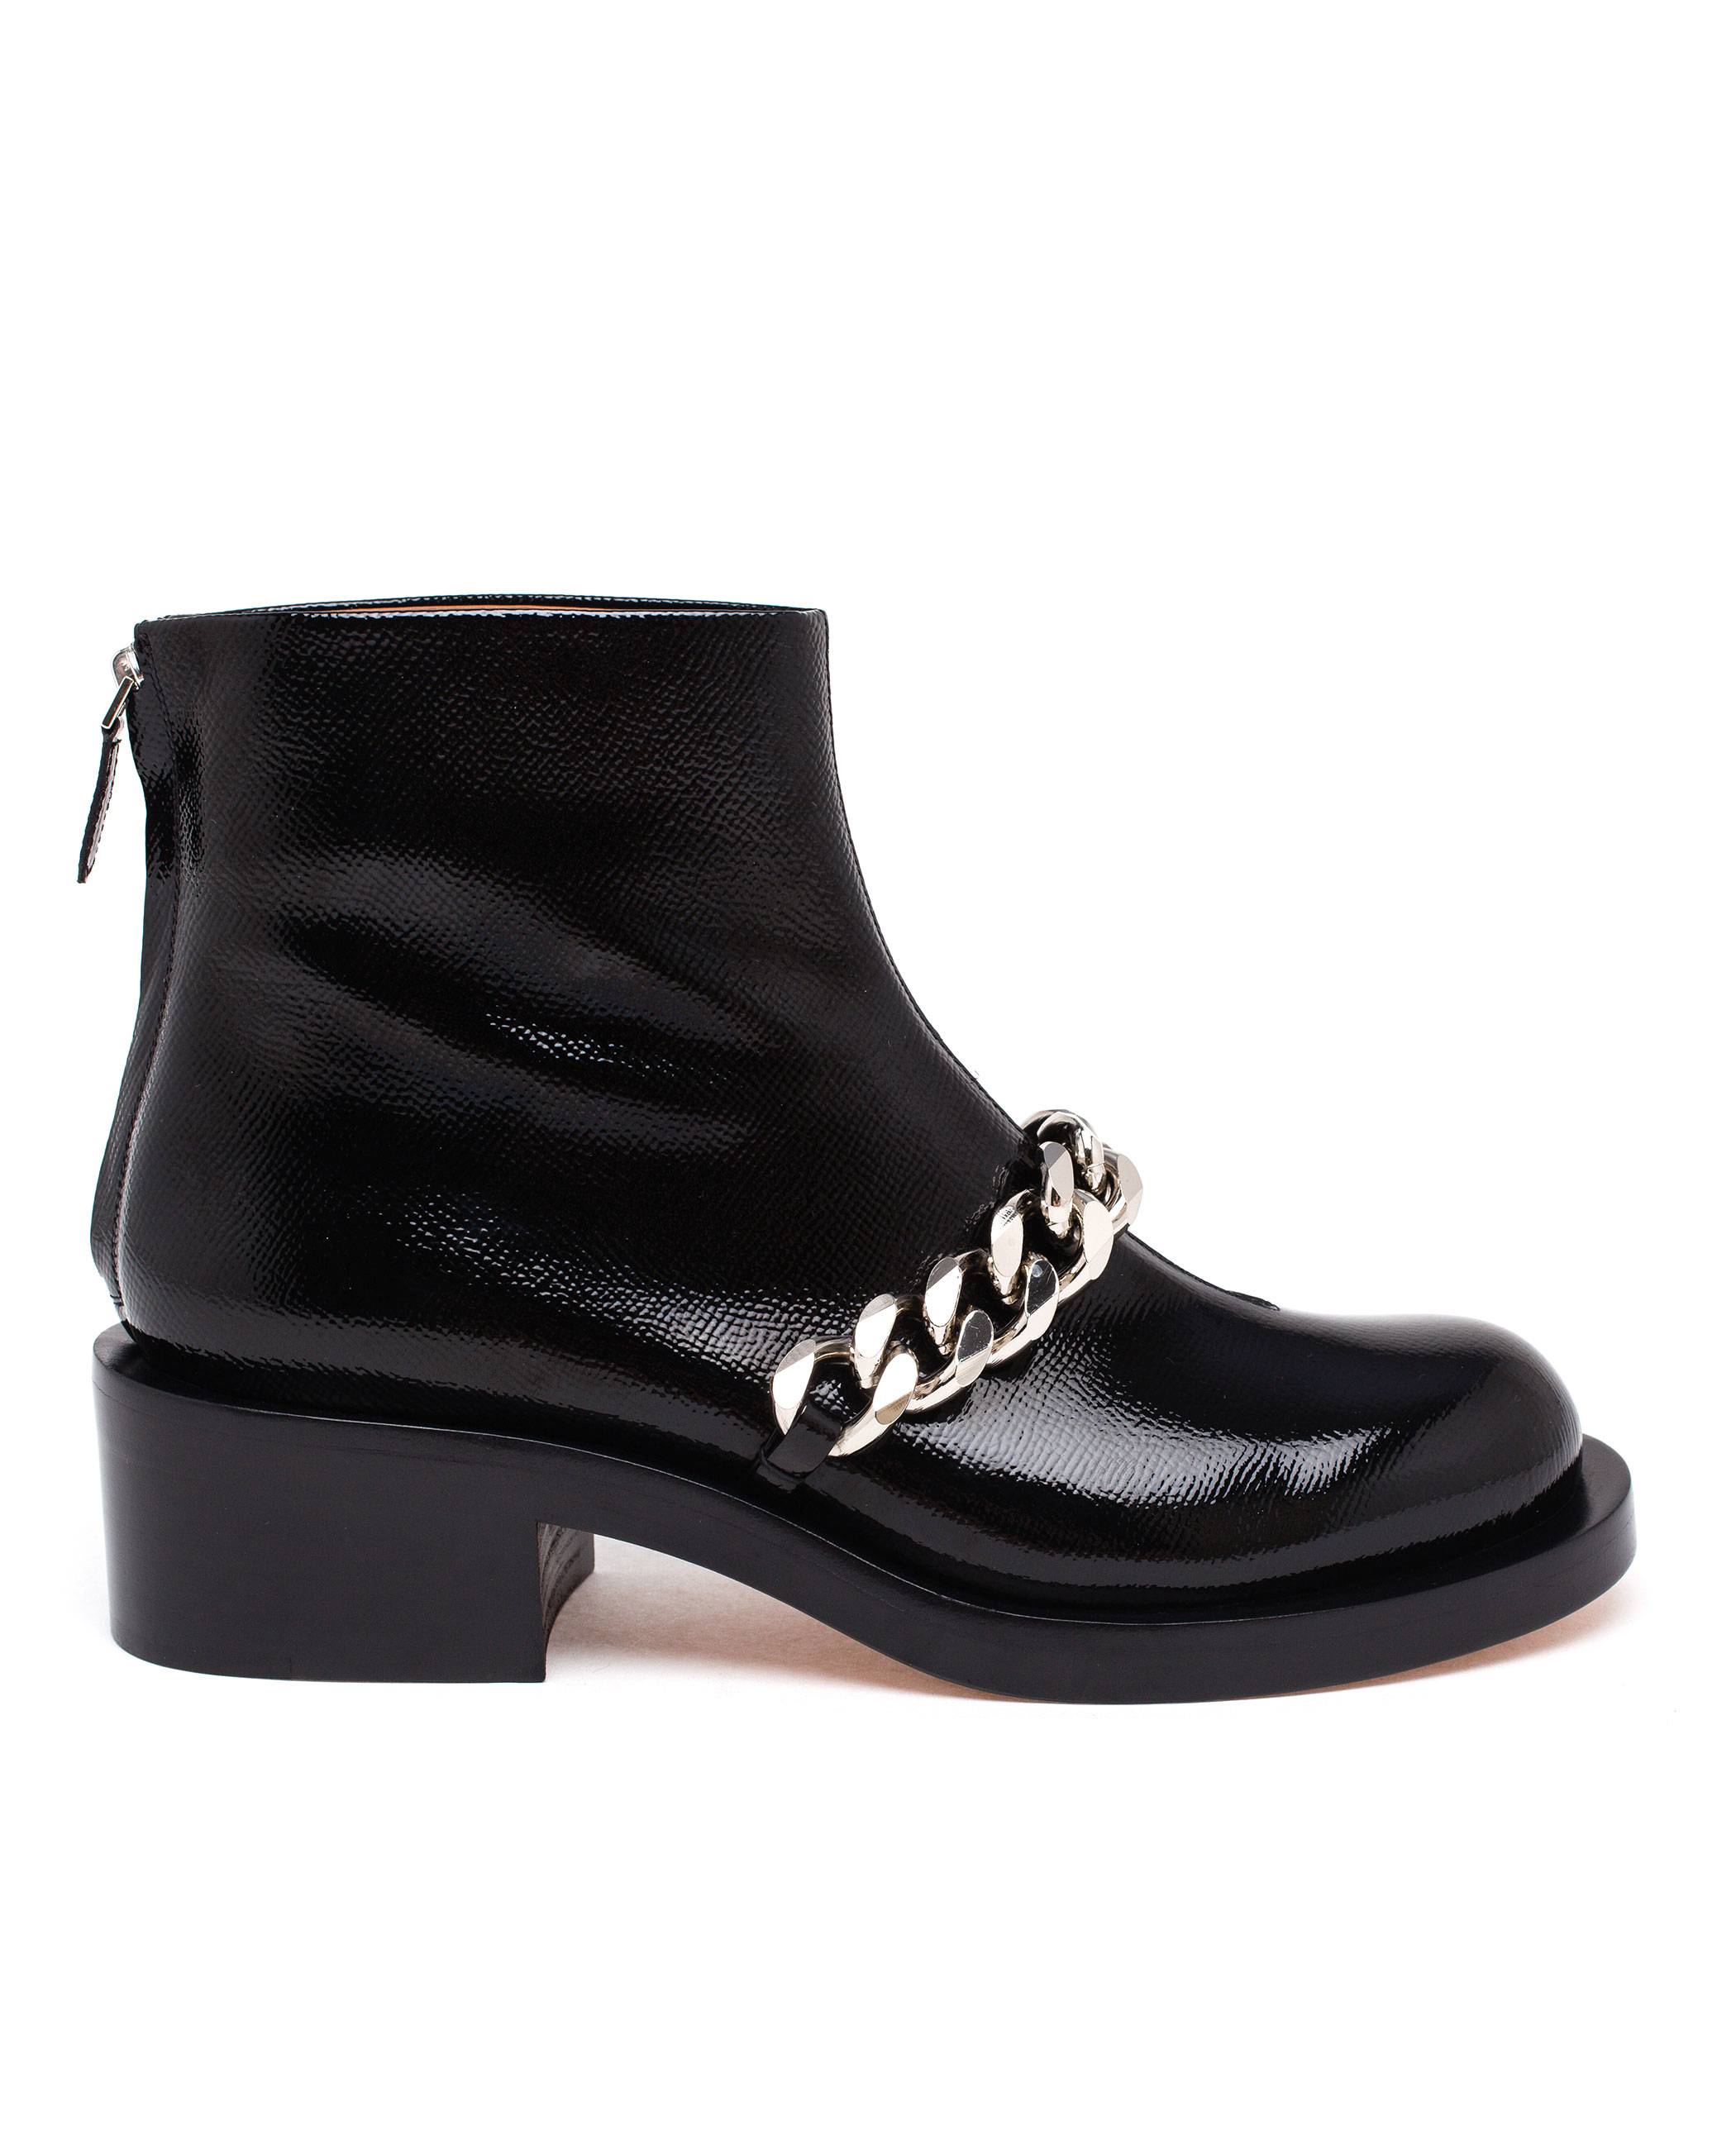 Lyst - Givenchy Patent Leather Chain Boots in Black